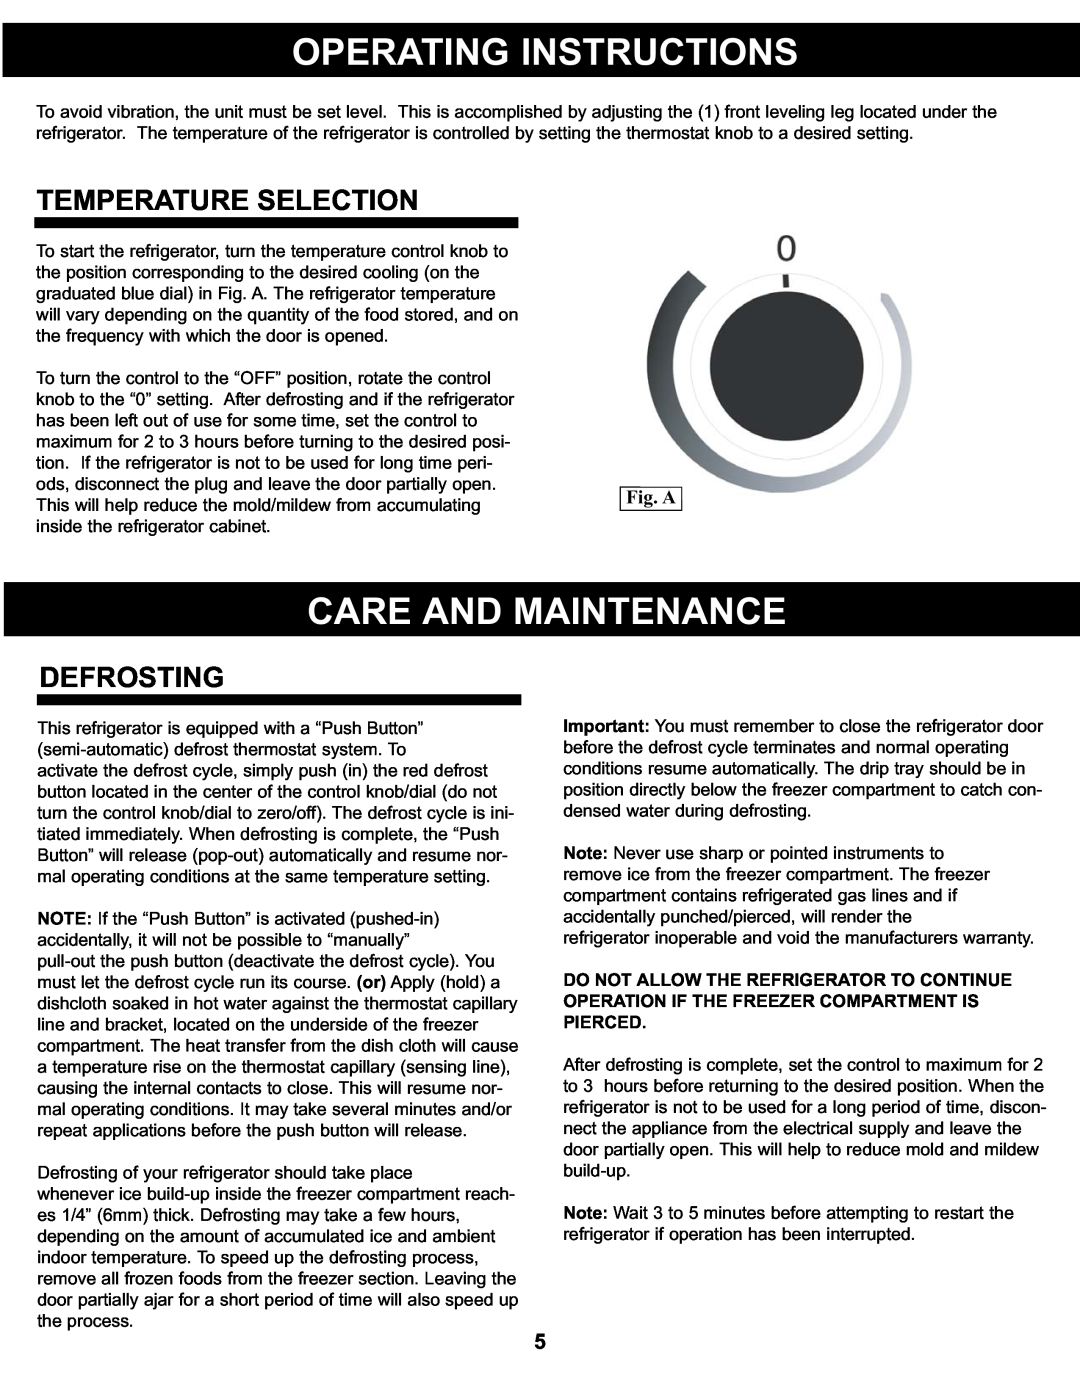 Danby DCR122WDD manual Operating Instructions, Care And Maintenance, Temperature Selection, Defrosting, Fig. A 